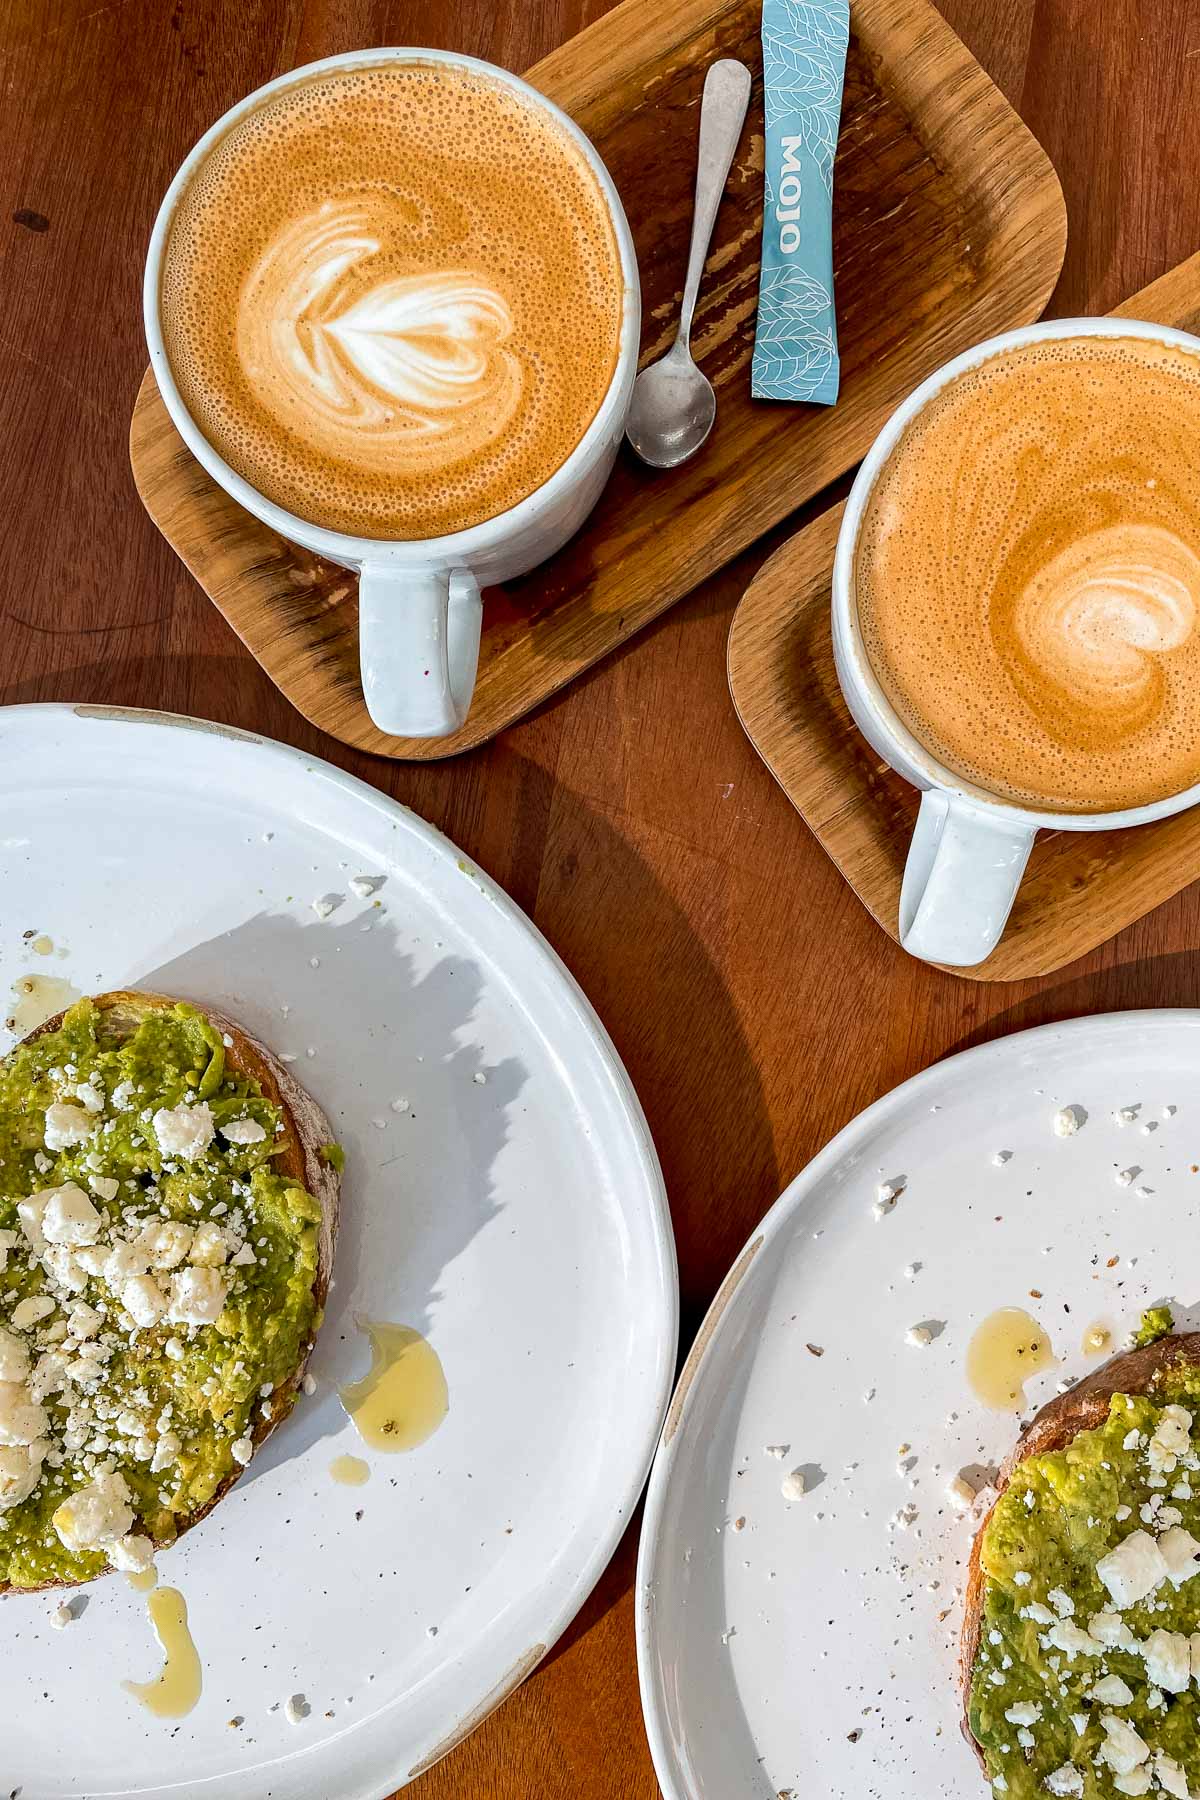 Coffees and avocado toasts at Mojo Cafe in Chicago